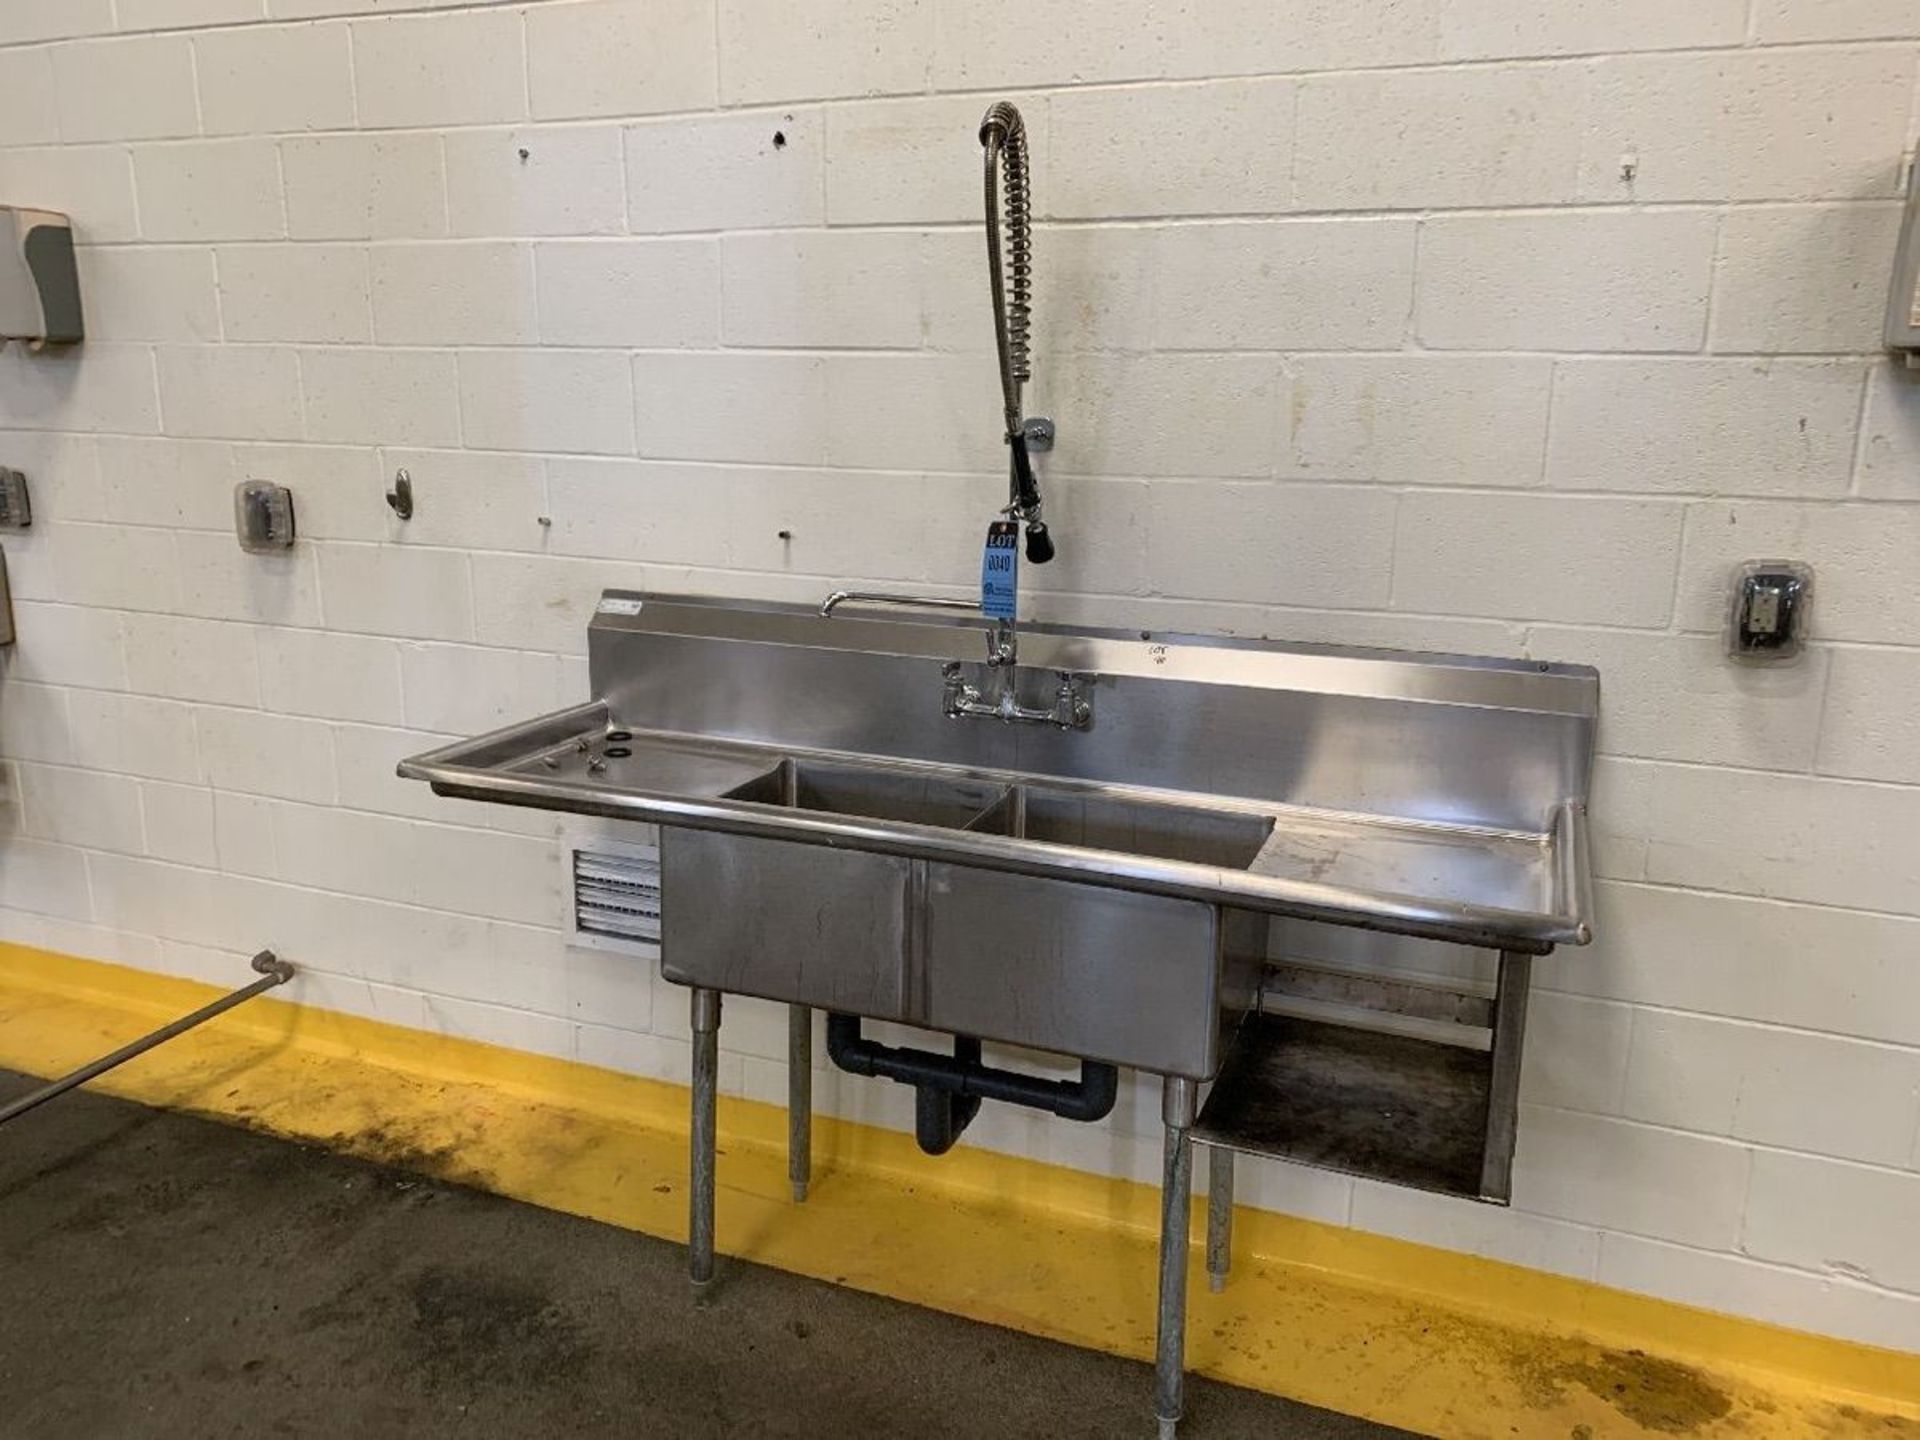 24" X 72" X 37" HIGH GREEN WORLD MODEL TSA-2-D1 STAINLESS STEEL TWO-BOWL SINK | Rig Fee: $100 - Image 2 of 4